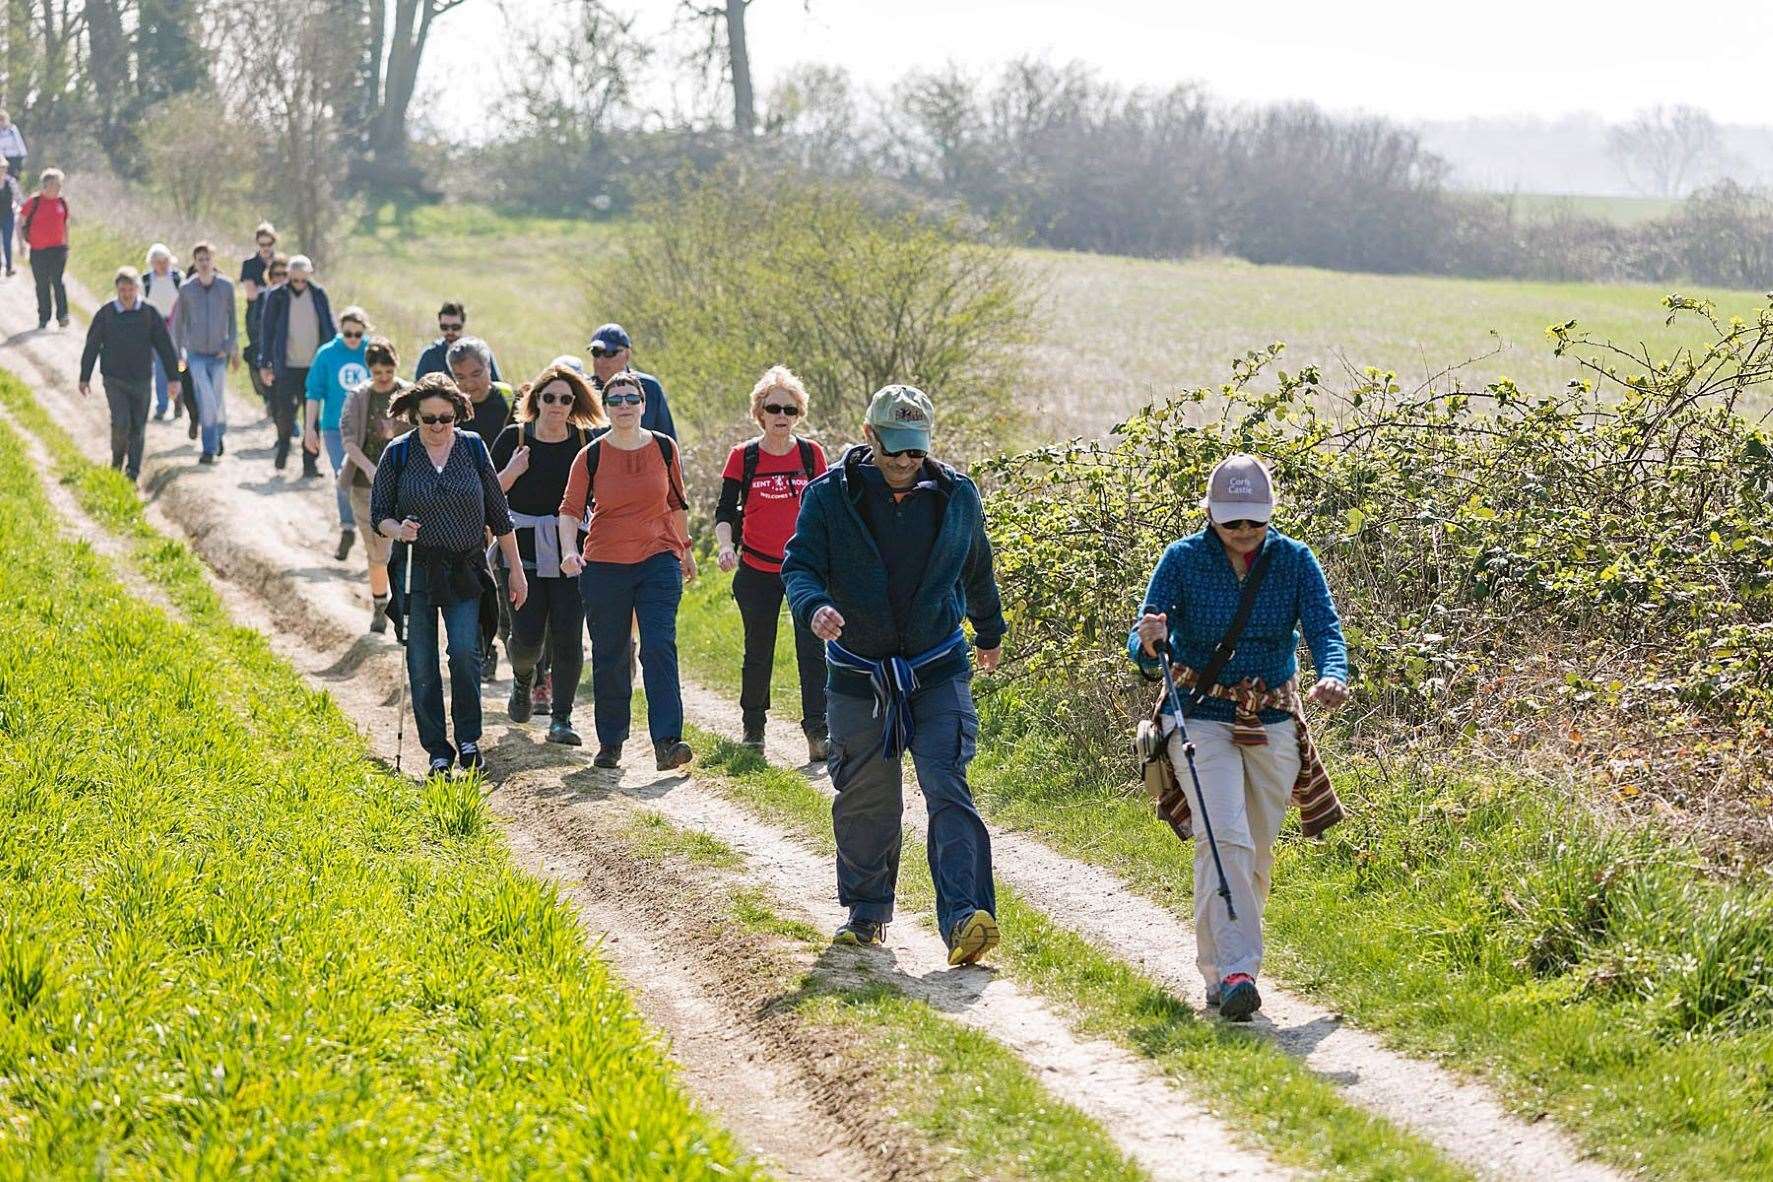 There will be at least 12 walks taking place during the festival. Picture: Visit Maidstone